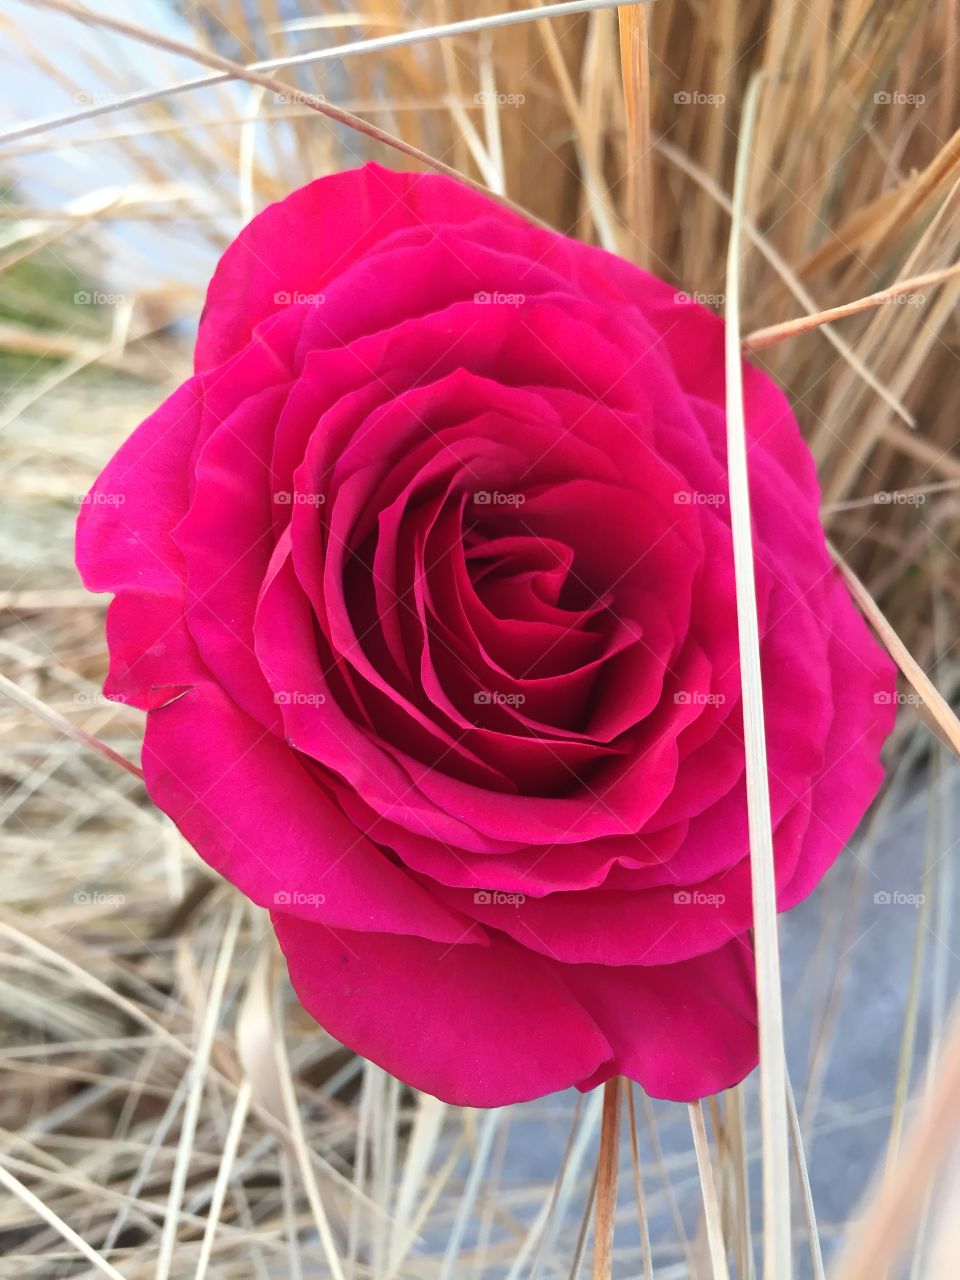 Valentines Rose sticking out from brush